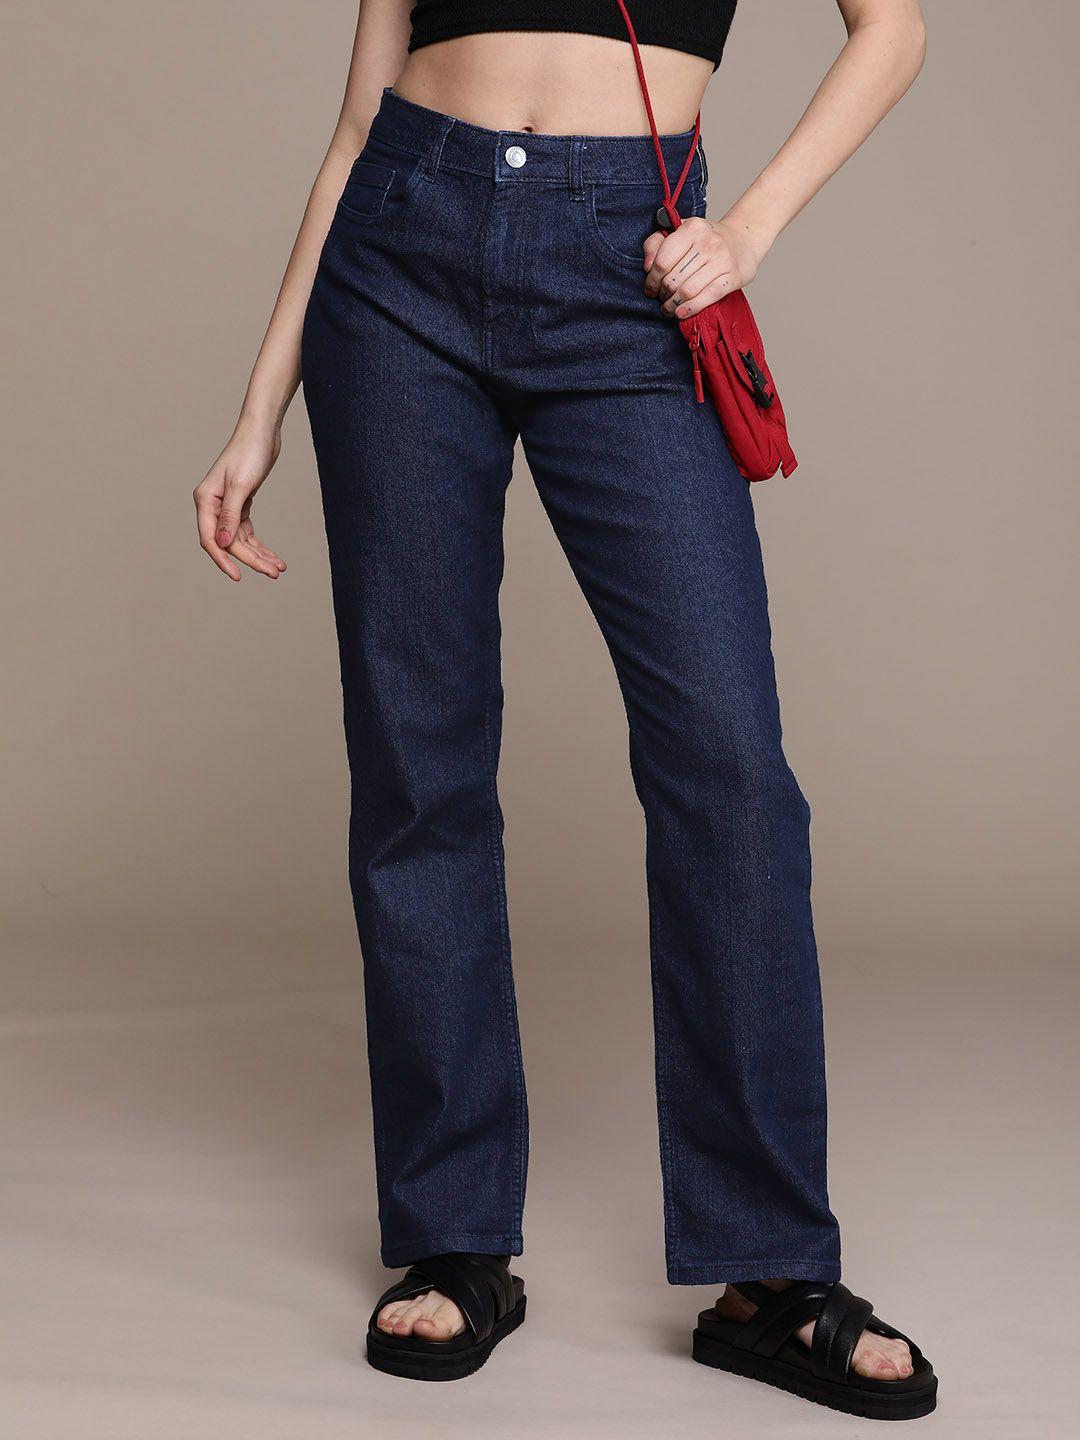 The Roadster Life Co. Women Straight Fit Stretchable Jeans